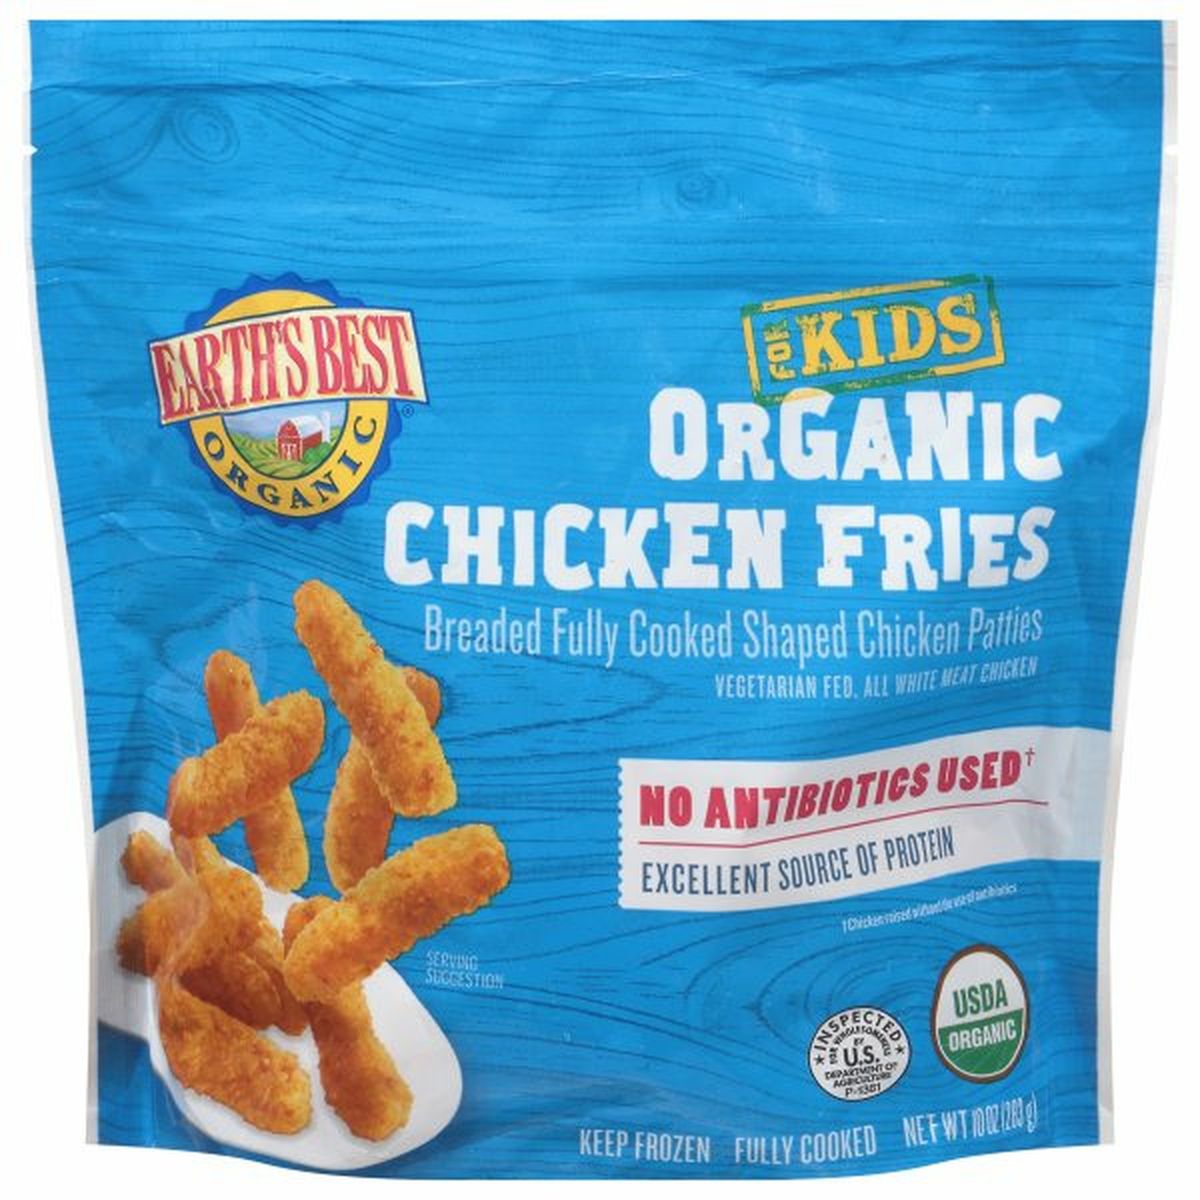 Calories in Earth's Best Chicken Fries, Organic, for Kids